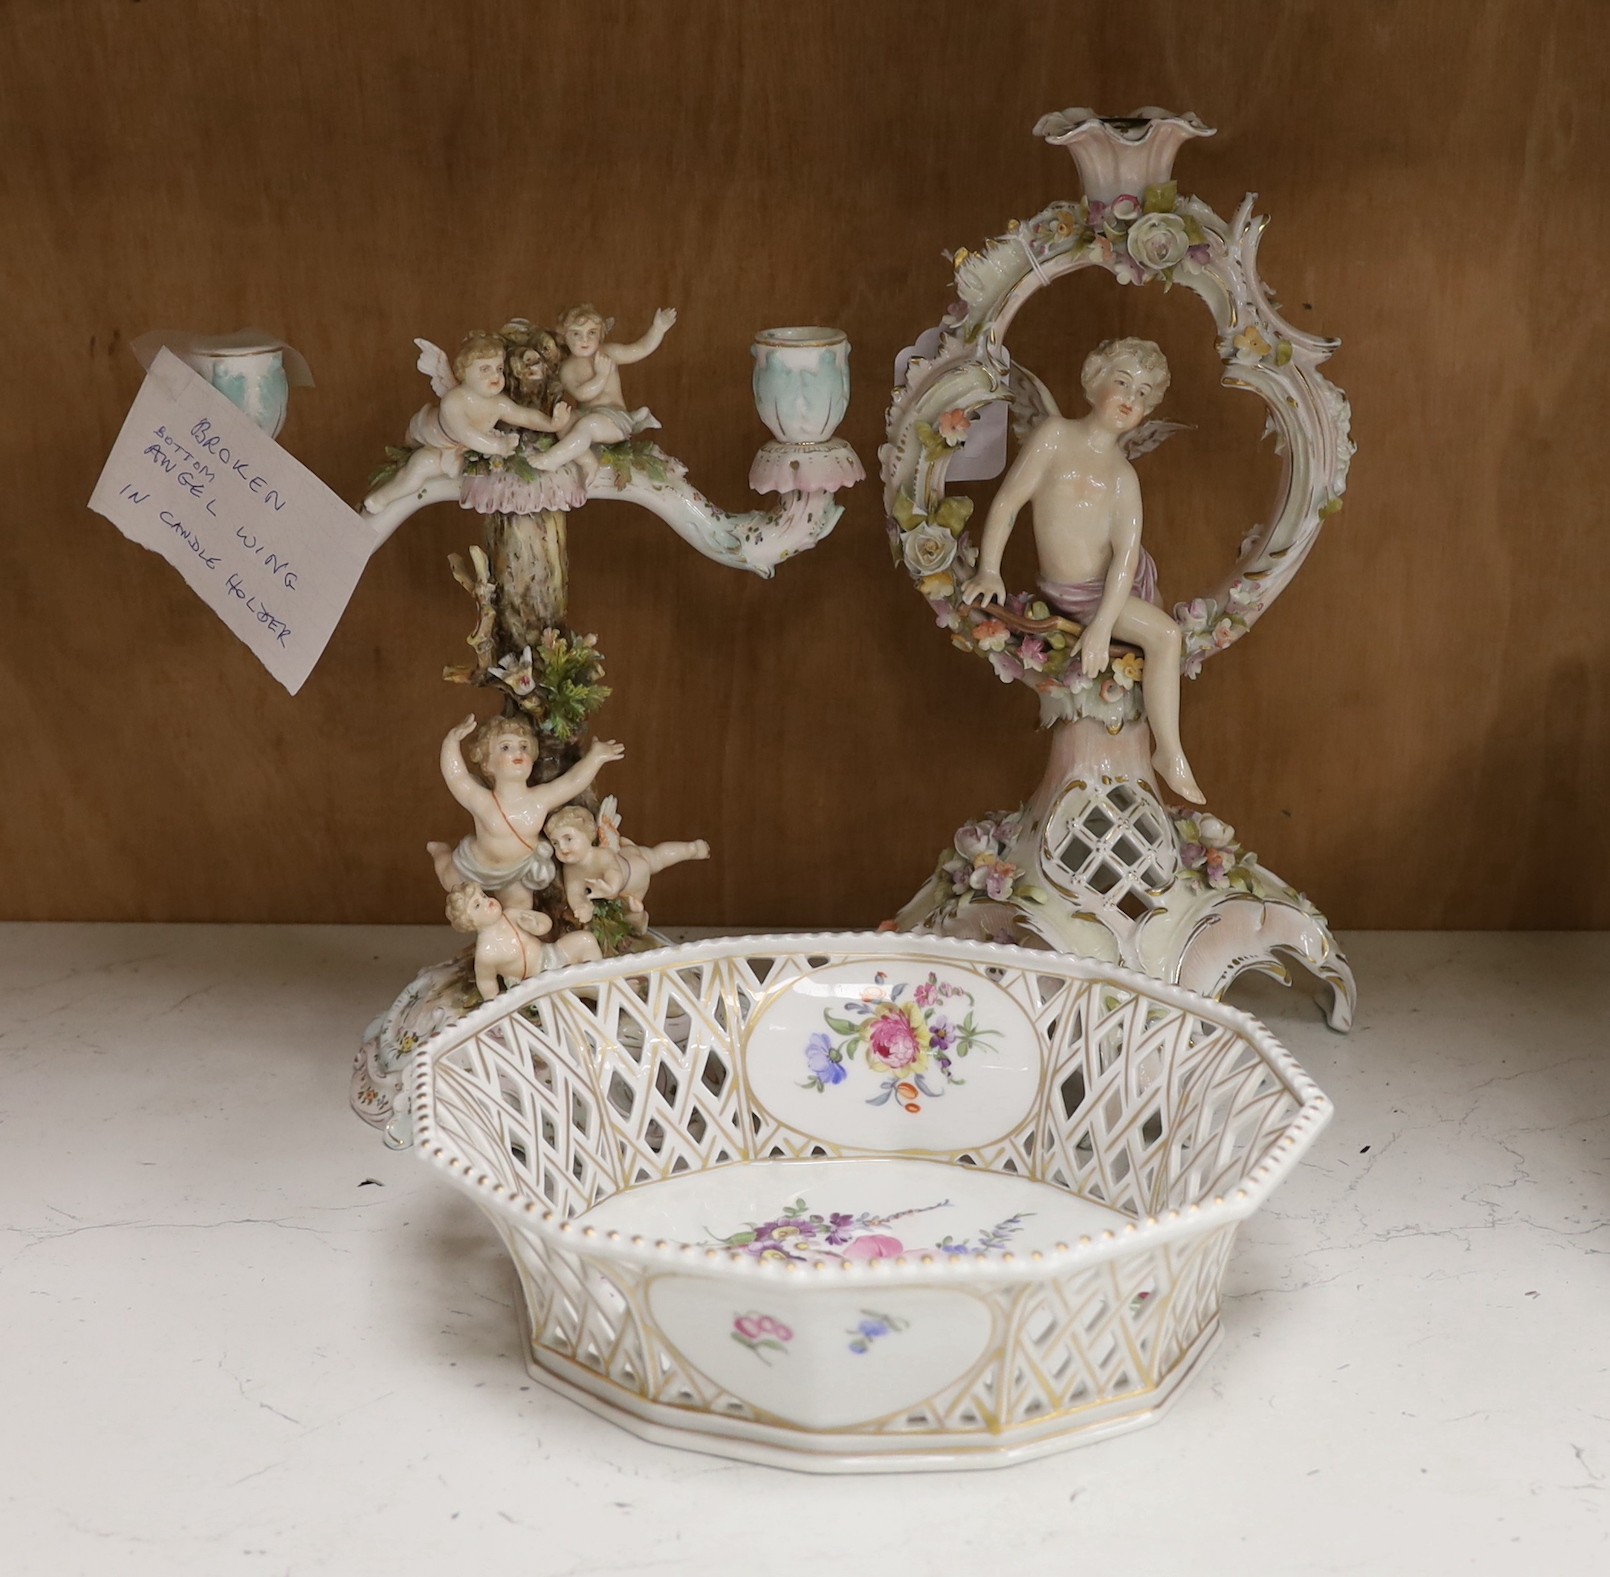 A Volkstedt porcelain candelabrum decorated with cherubs, a candlestick and an octagonal basket                                                                                                                             